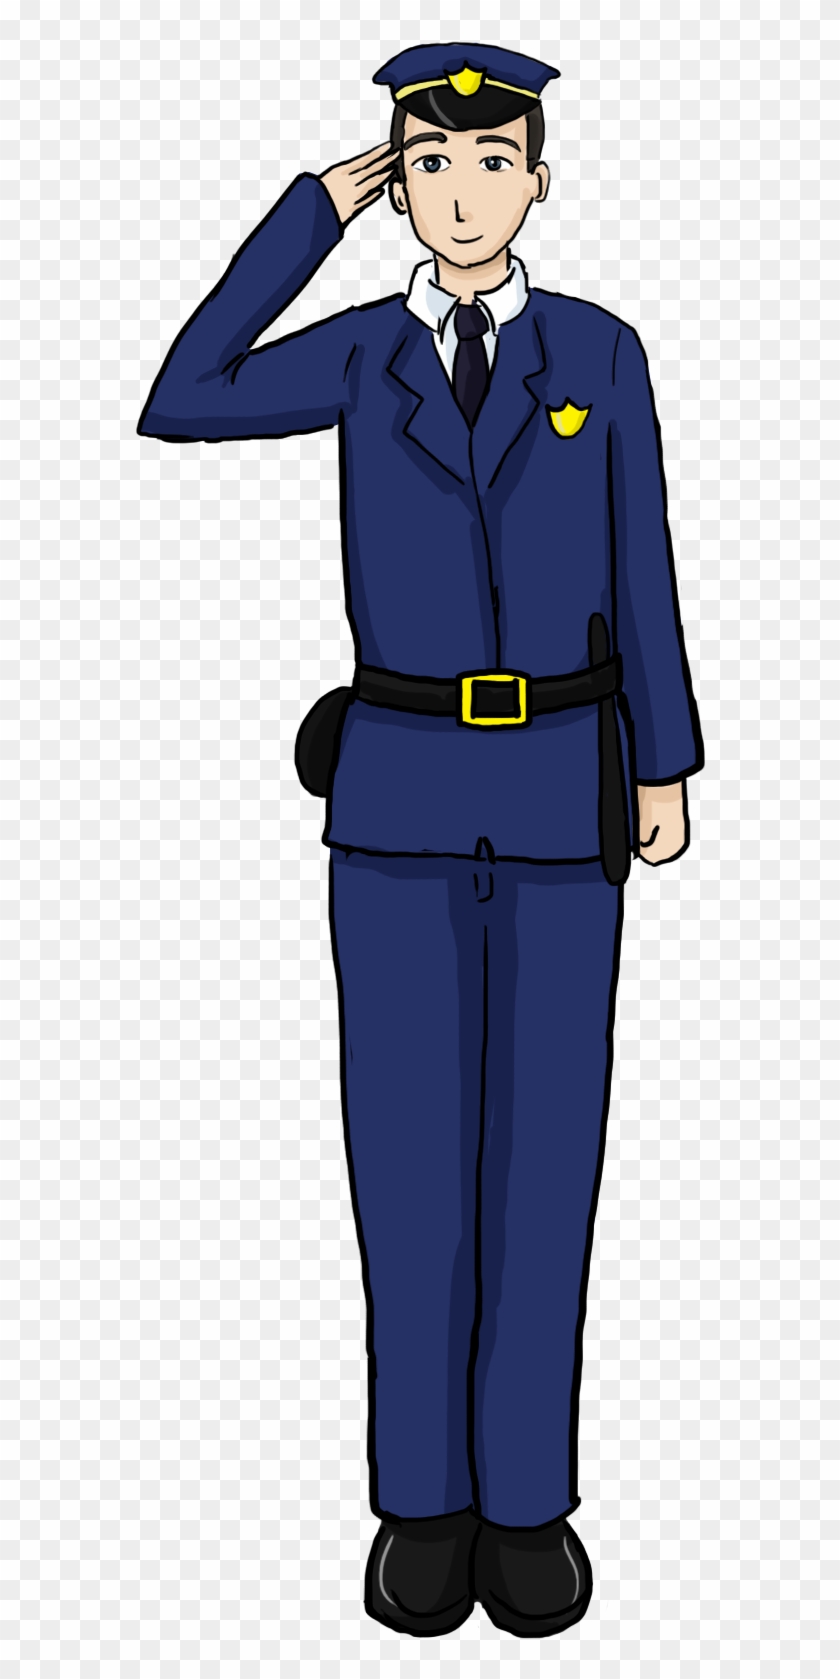 Free Policeman Clip Art Be8qf1 Clipart - Police Images Clip Art #419211